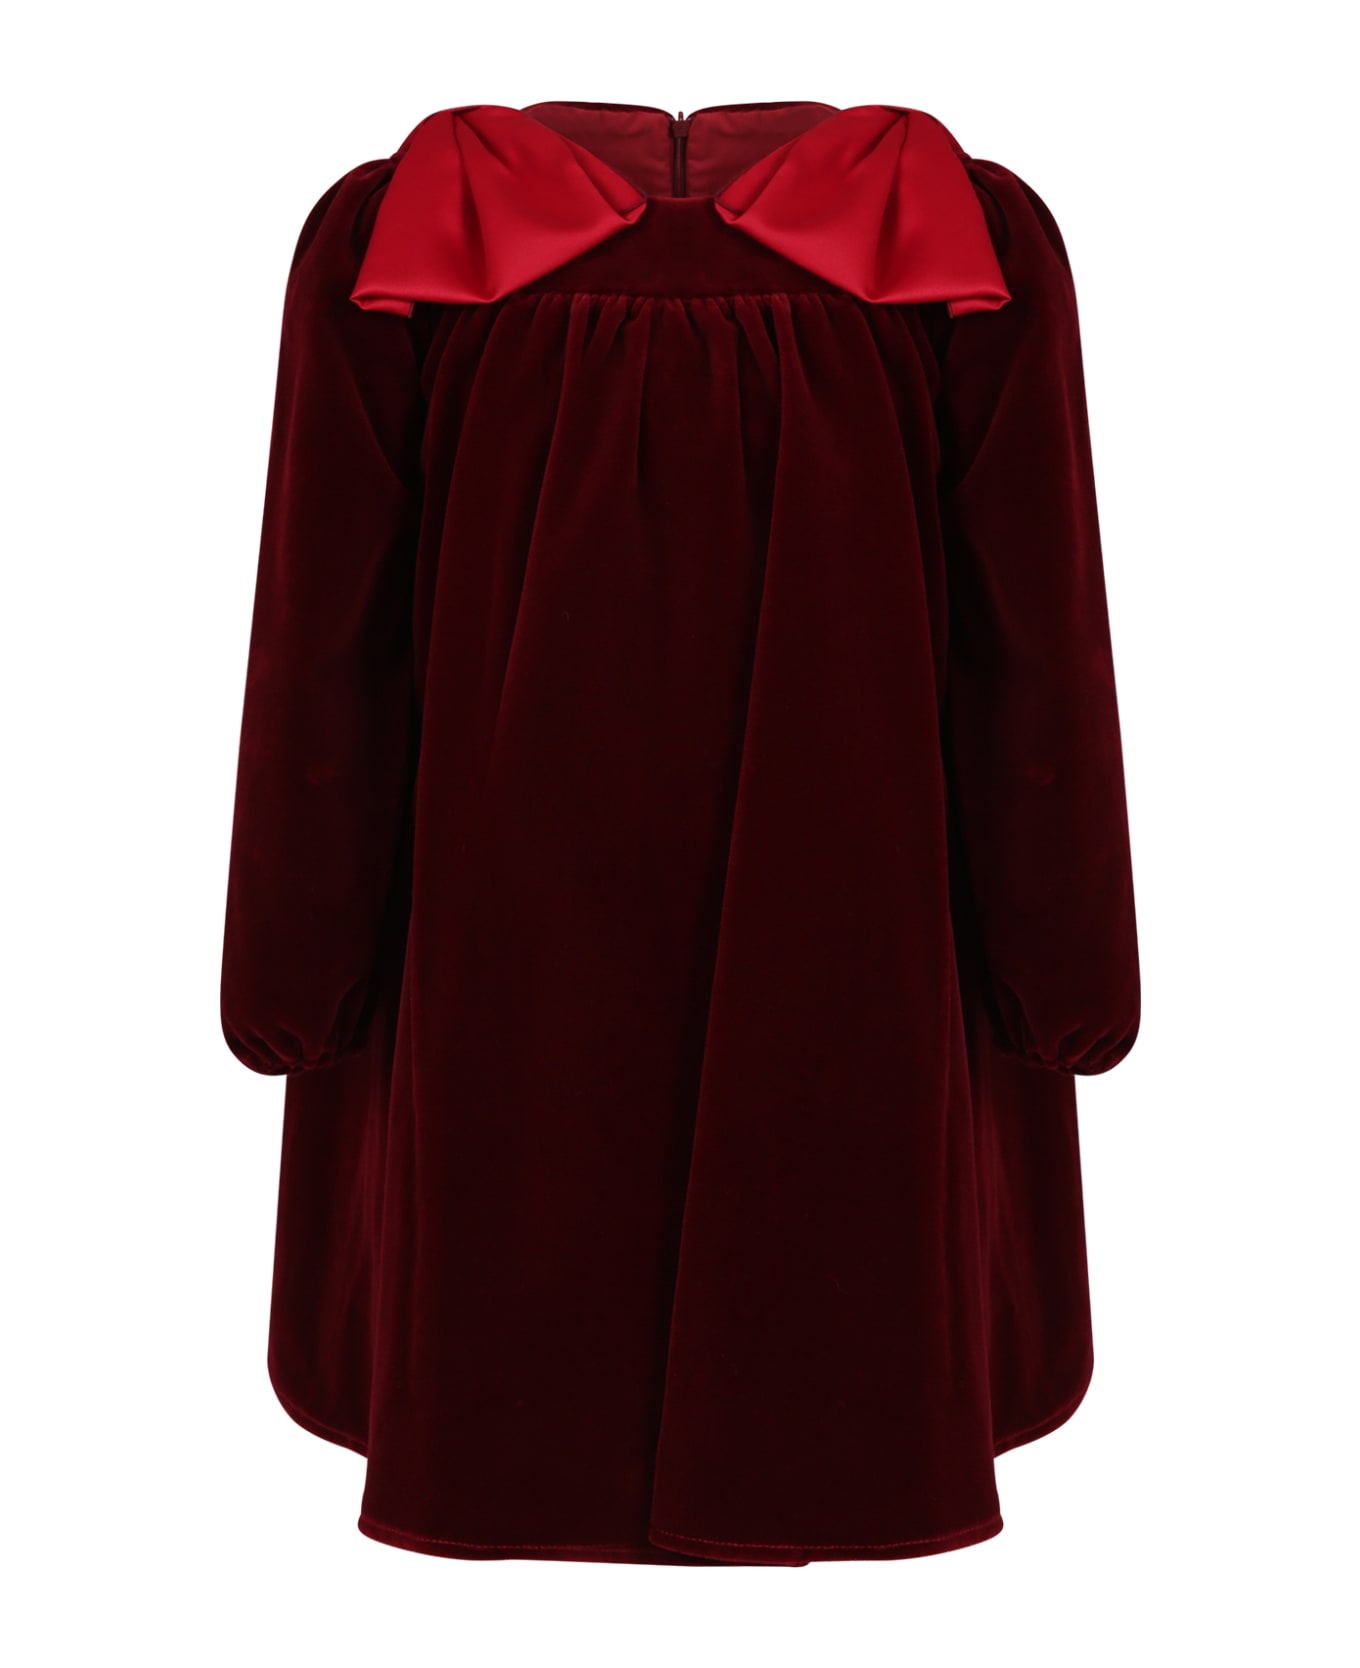 La stupenderia Burgundy Dress For Girl With Bows - Bordeaux